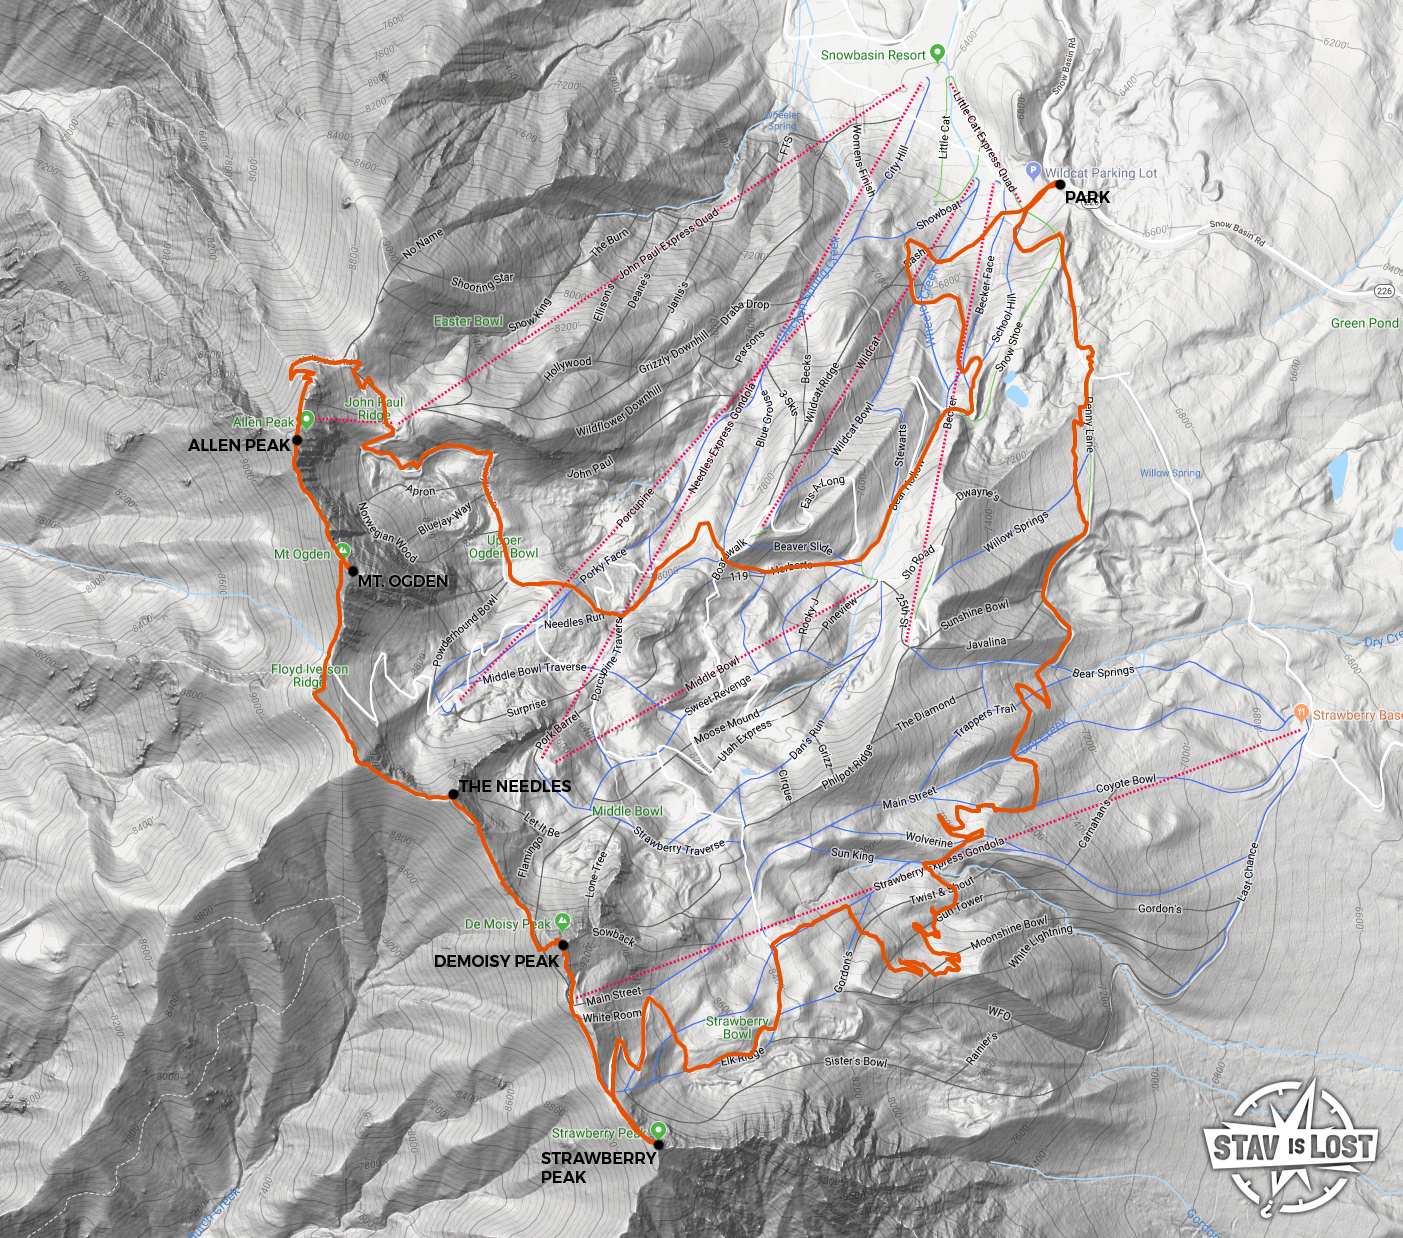 map for Mount Ogden and DeMoisy Peak via Snowbasin by stav is lost